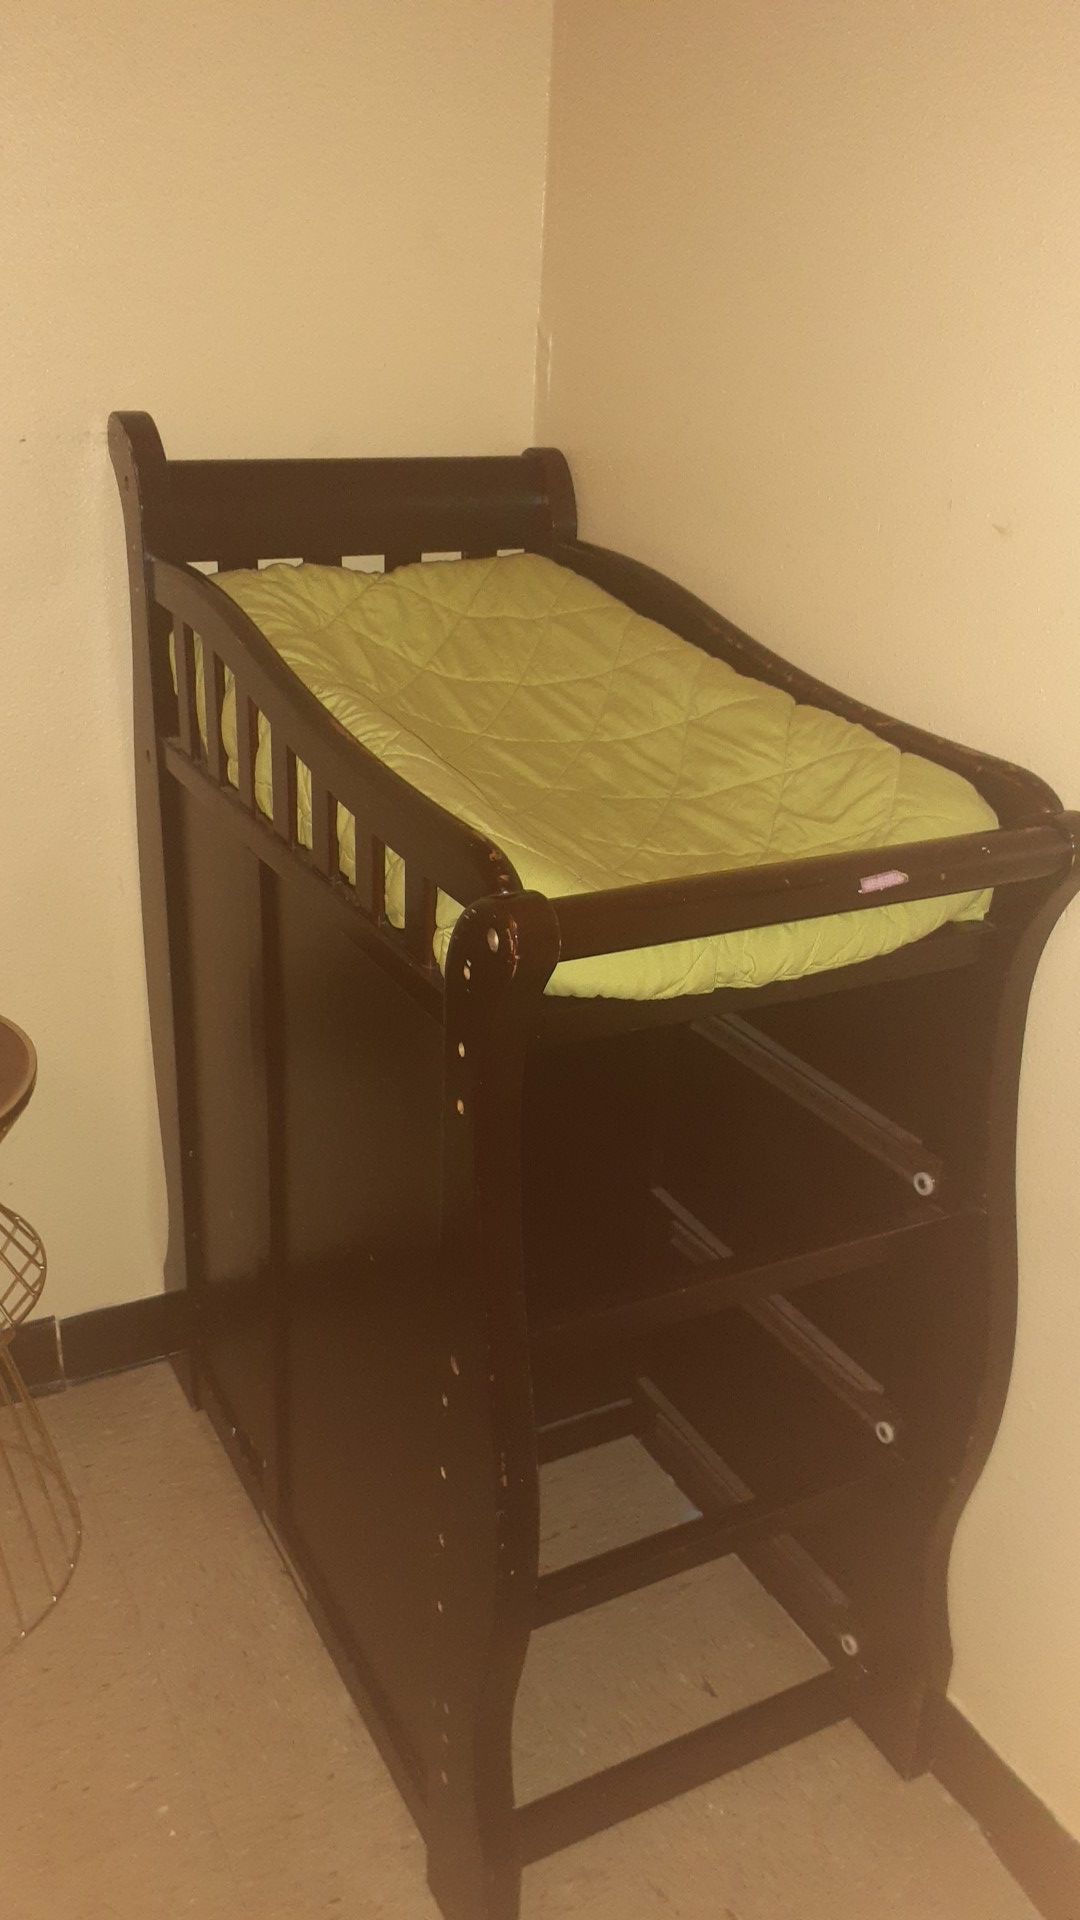 Changing table w mattress, 2 covers